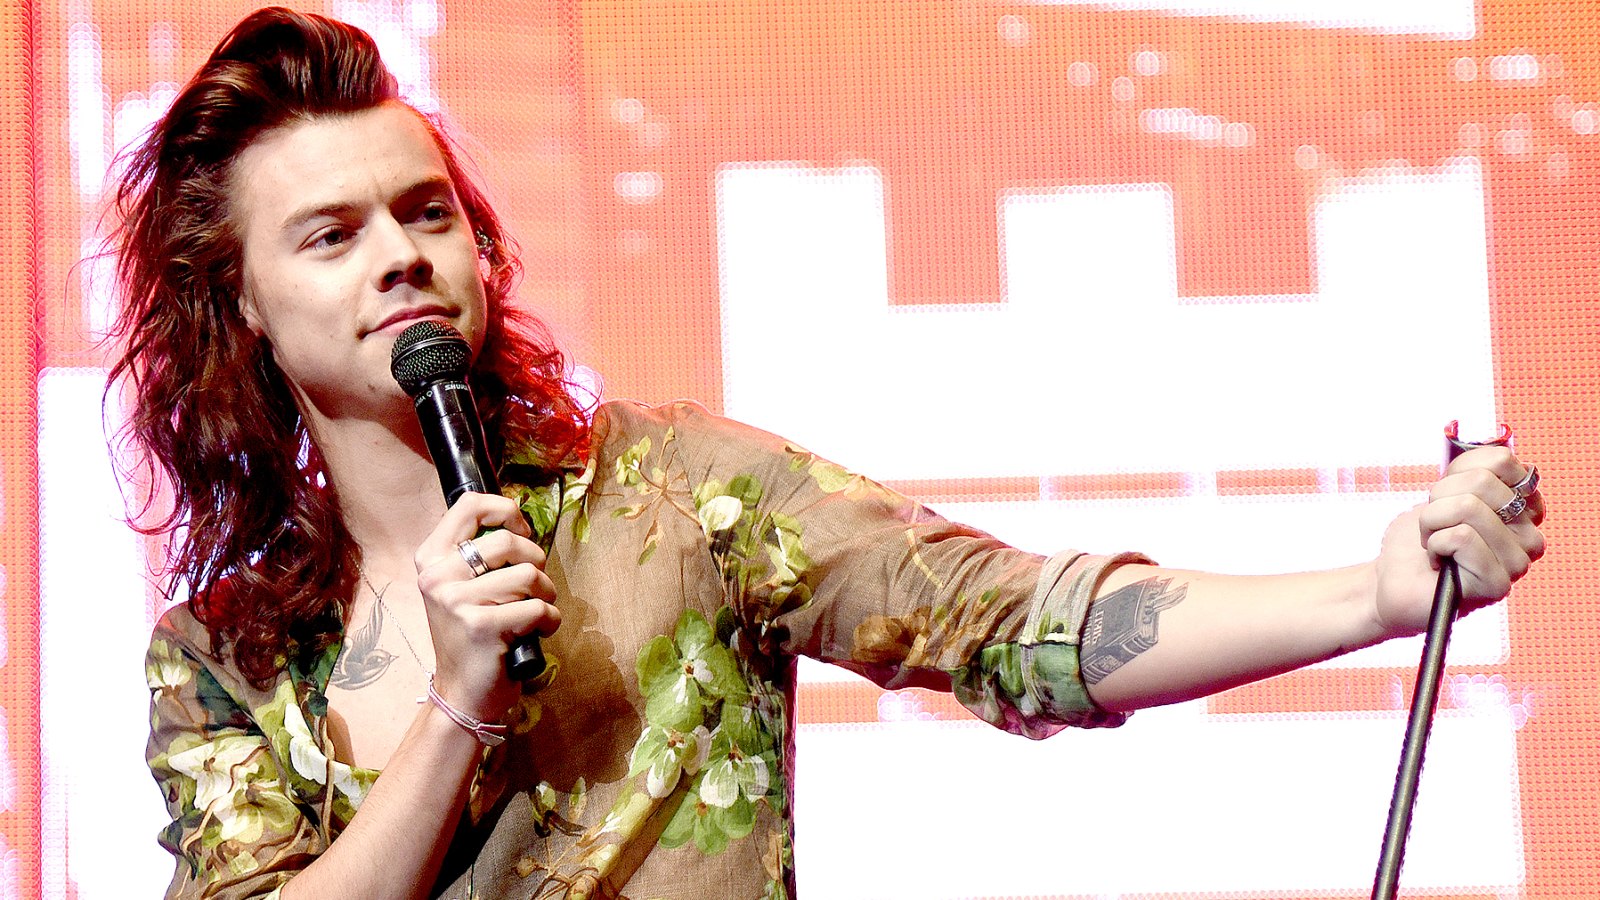 Harry Styles of One Direction performs during the 6th Annual 99.7 NOW! Triple Ho Show at SAP Center on December 2, 2015 in San Jose, California.